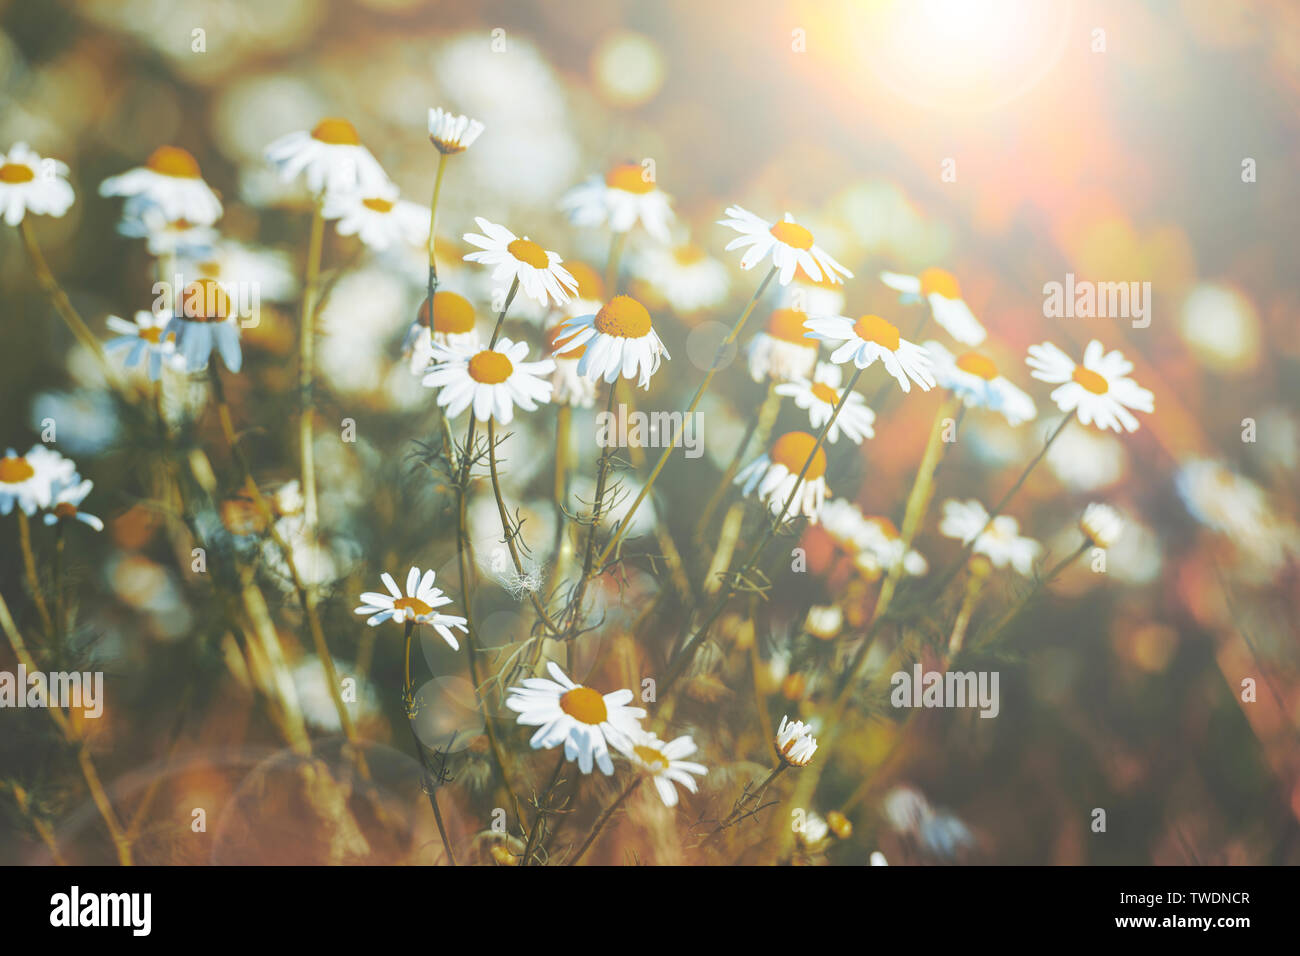 Beautiful daisy flowers in spring with sun flare. Shallow focus, muted colors Stock Photo